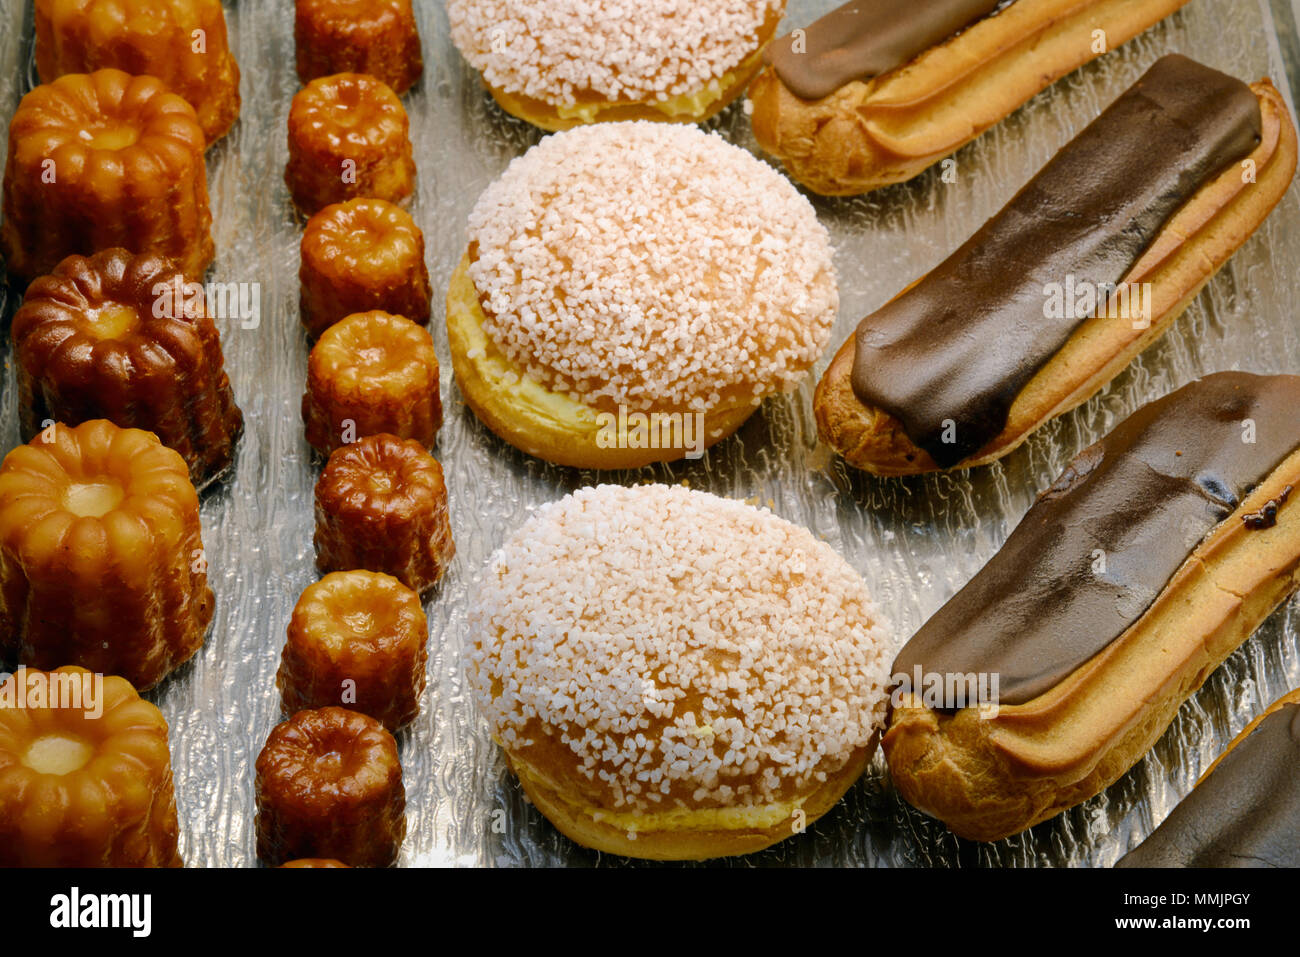 Display of Canelés, Tropezienne Cream Cakes & Chocolate Eclairs Cakes and Pastries in a French Patisserie France Stock Photo